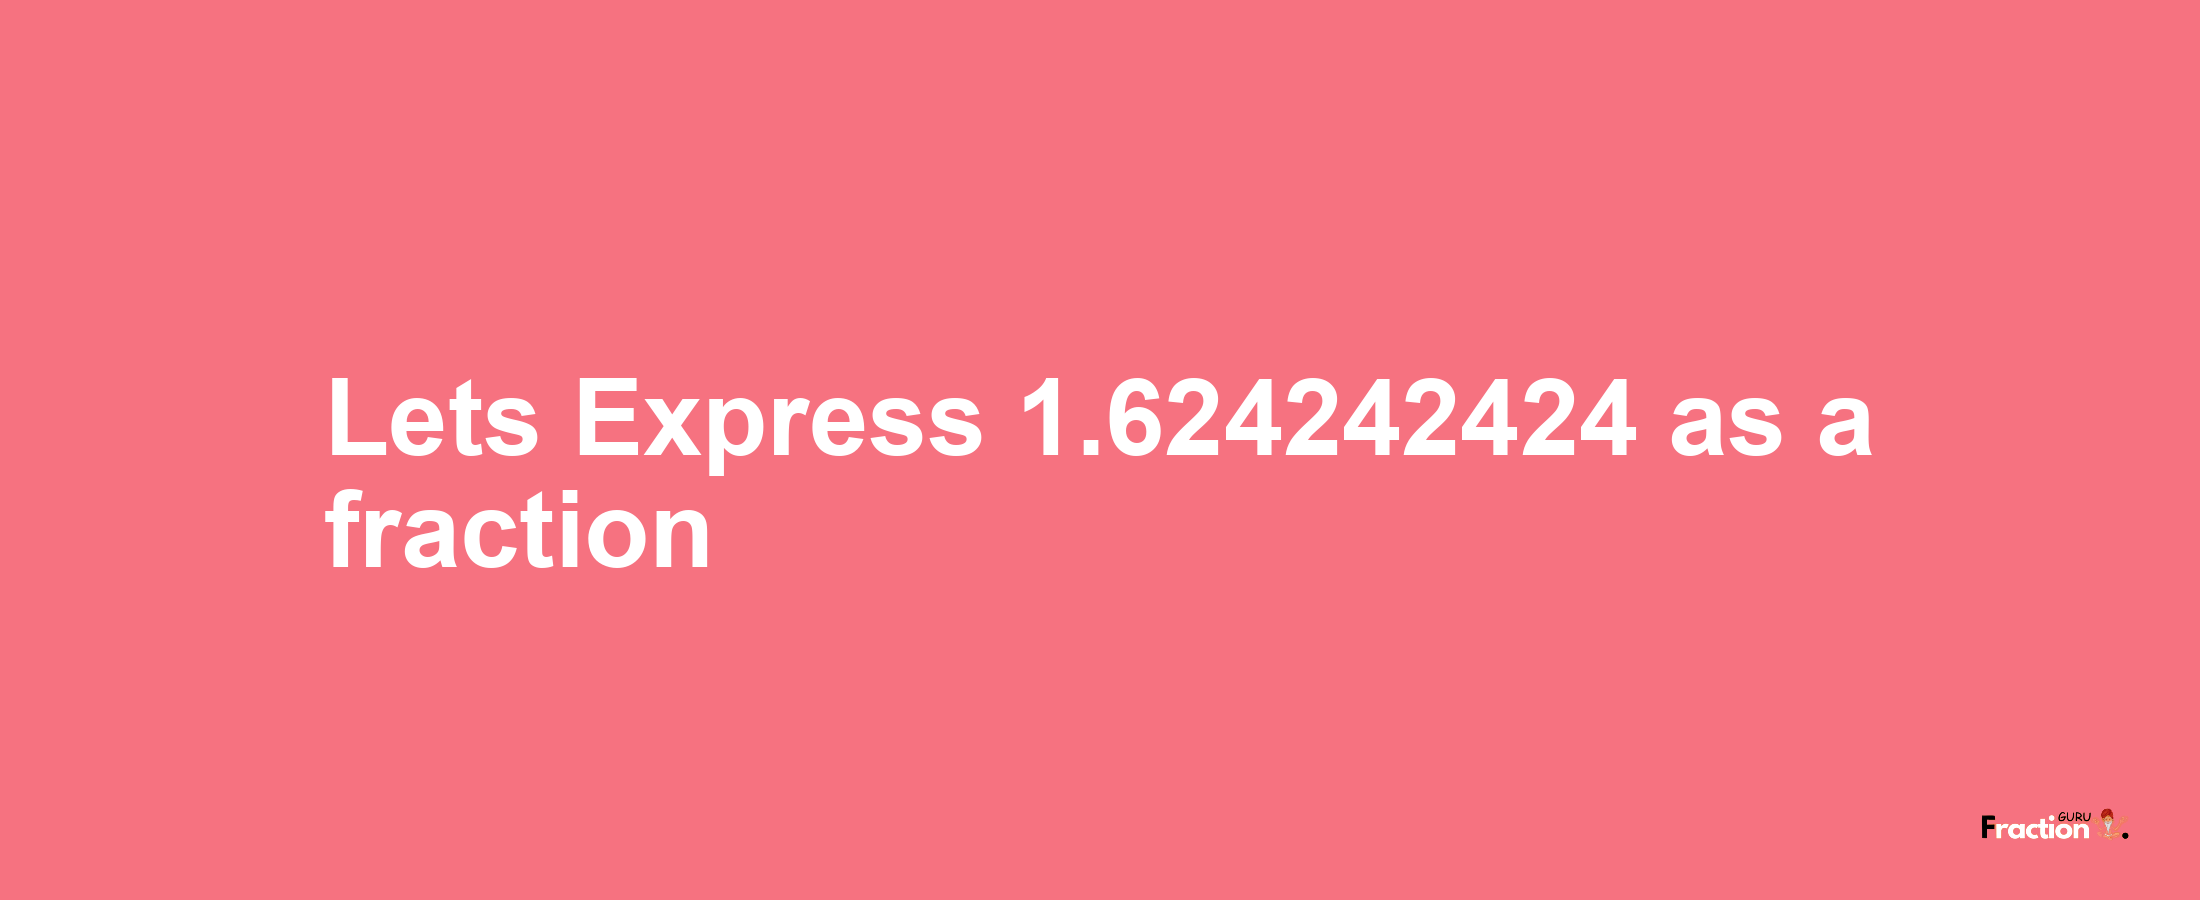 Lets Express 1.624242424 as afraction